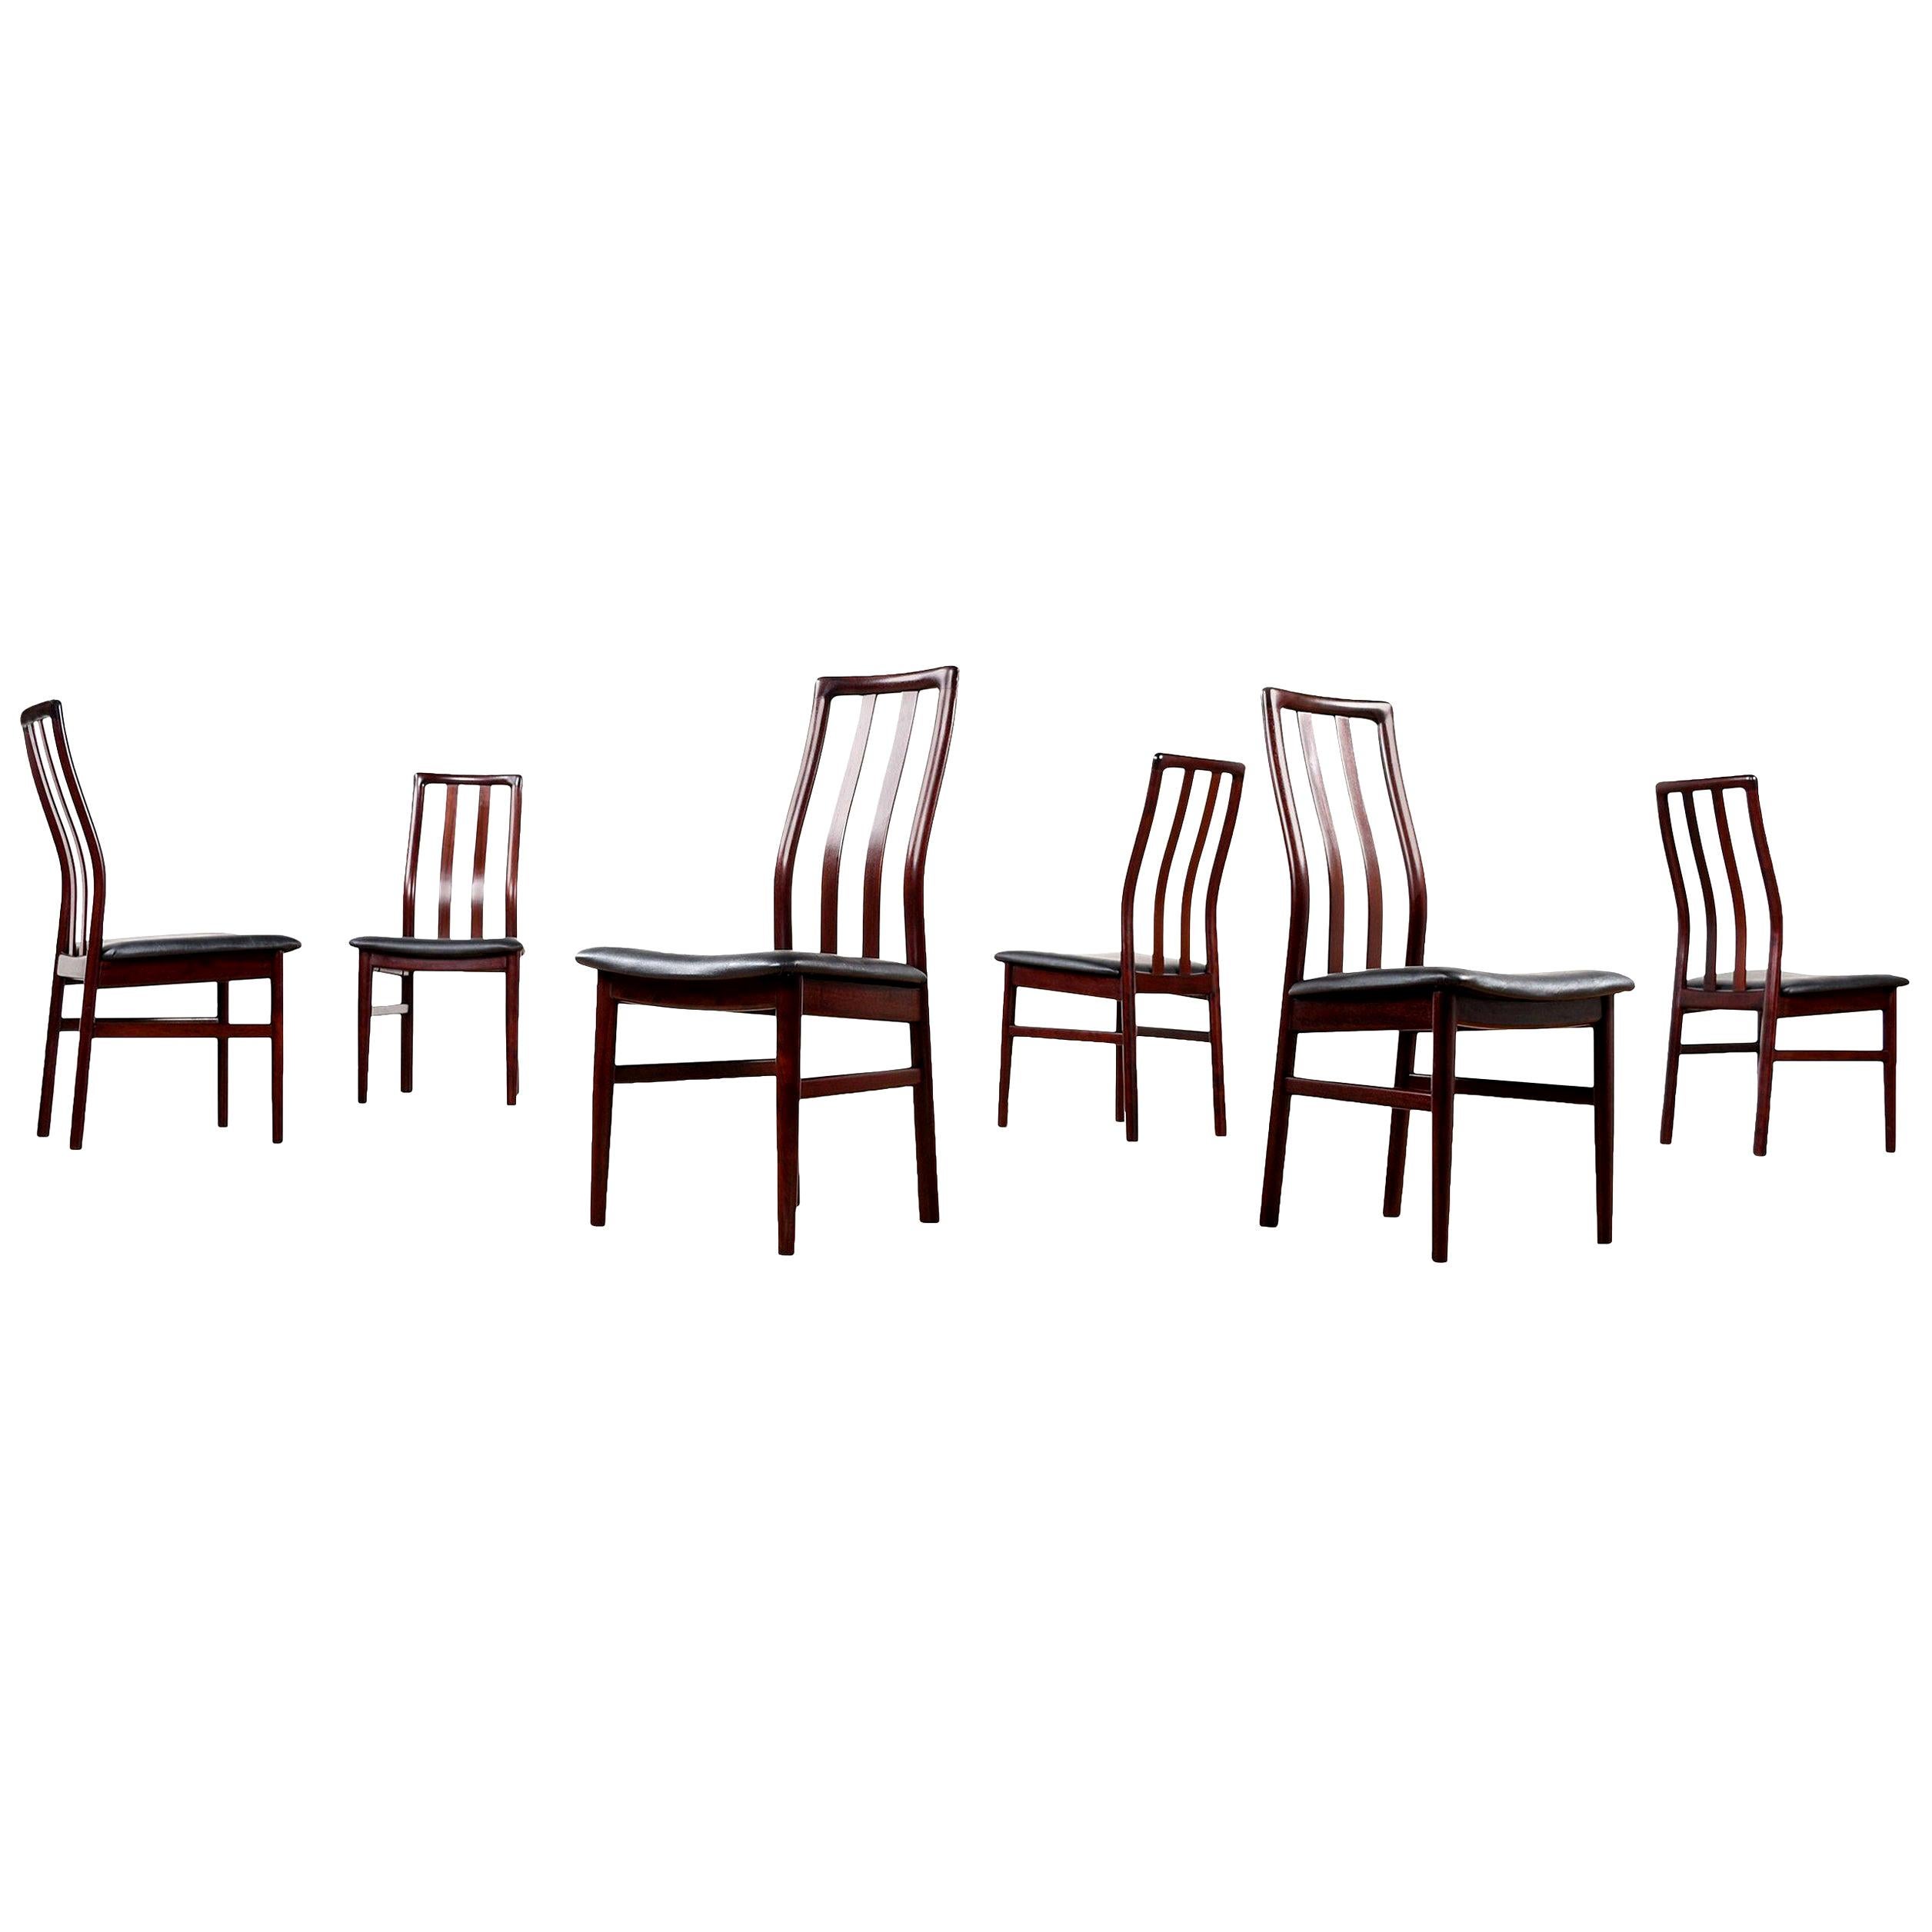 Danish Rosewood Slat High Back Dining Chairs with New Black Vinyl Seats